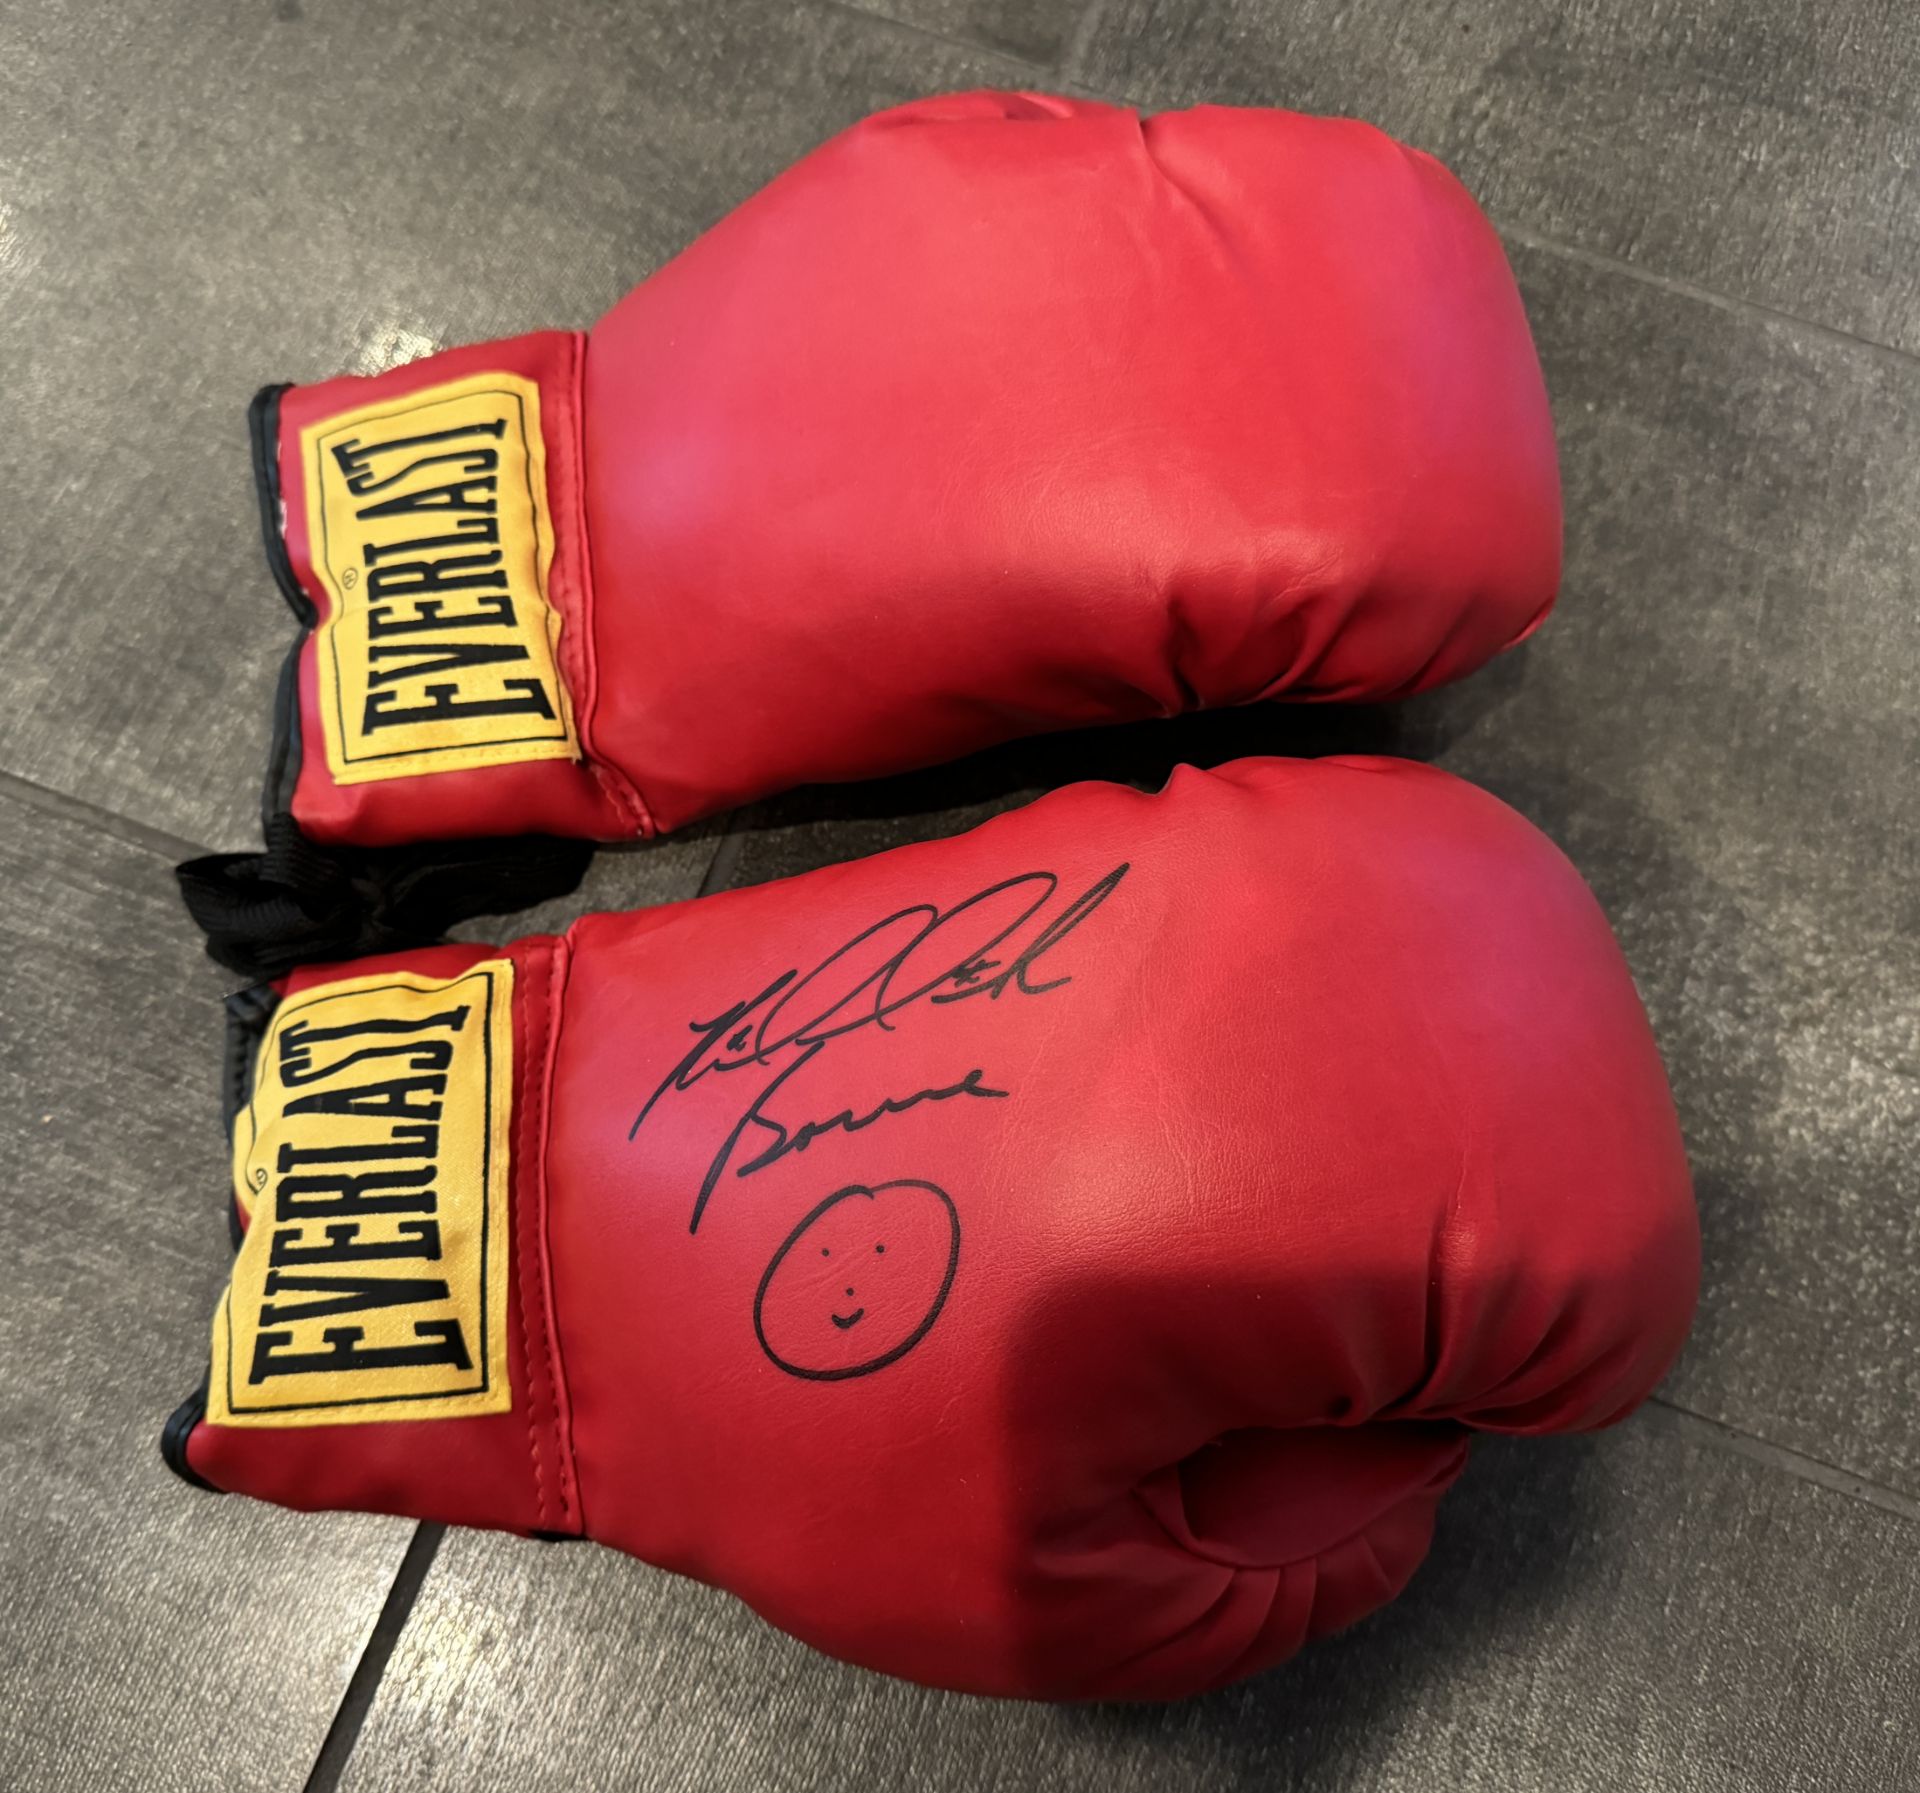 BOXING GLOVES SIGNED BY RIDDIC Riddick BOWE - Image 2 of 3